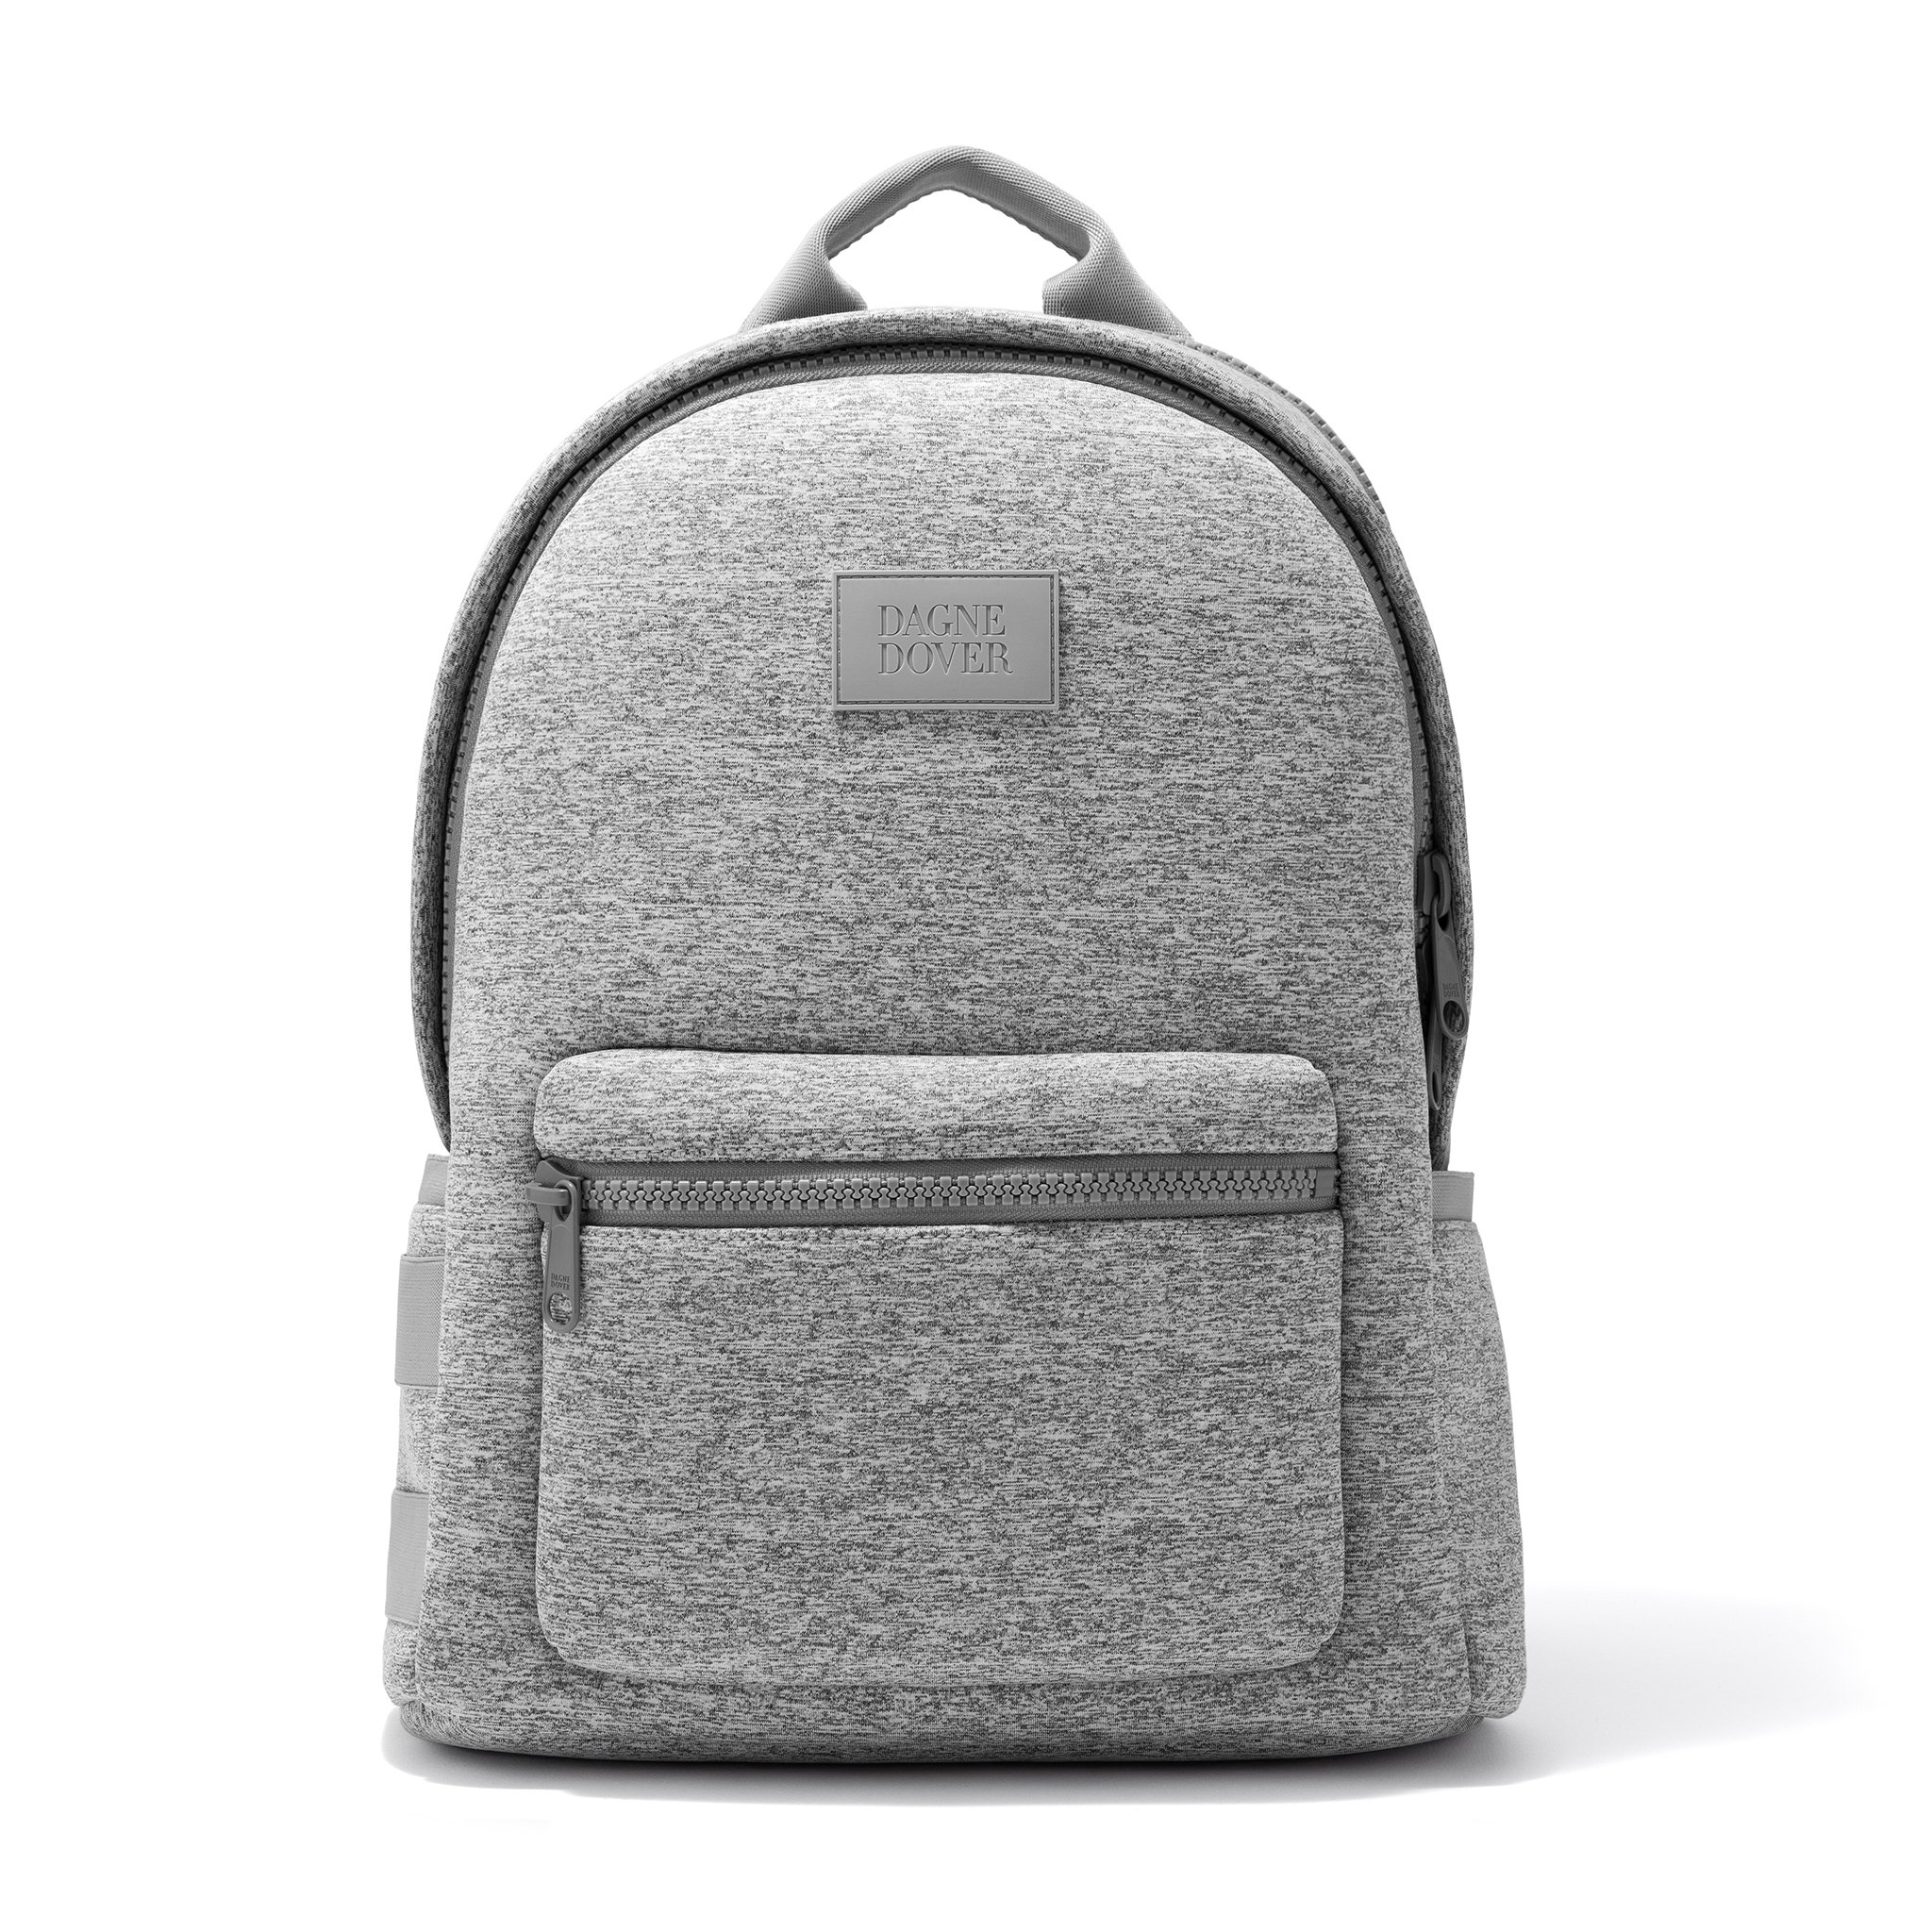 17 Professional Women's Backpacks for Work & Travel - Travel After Five